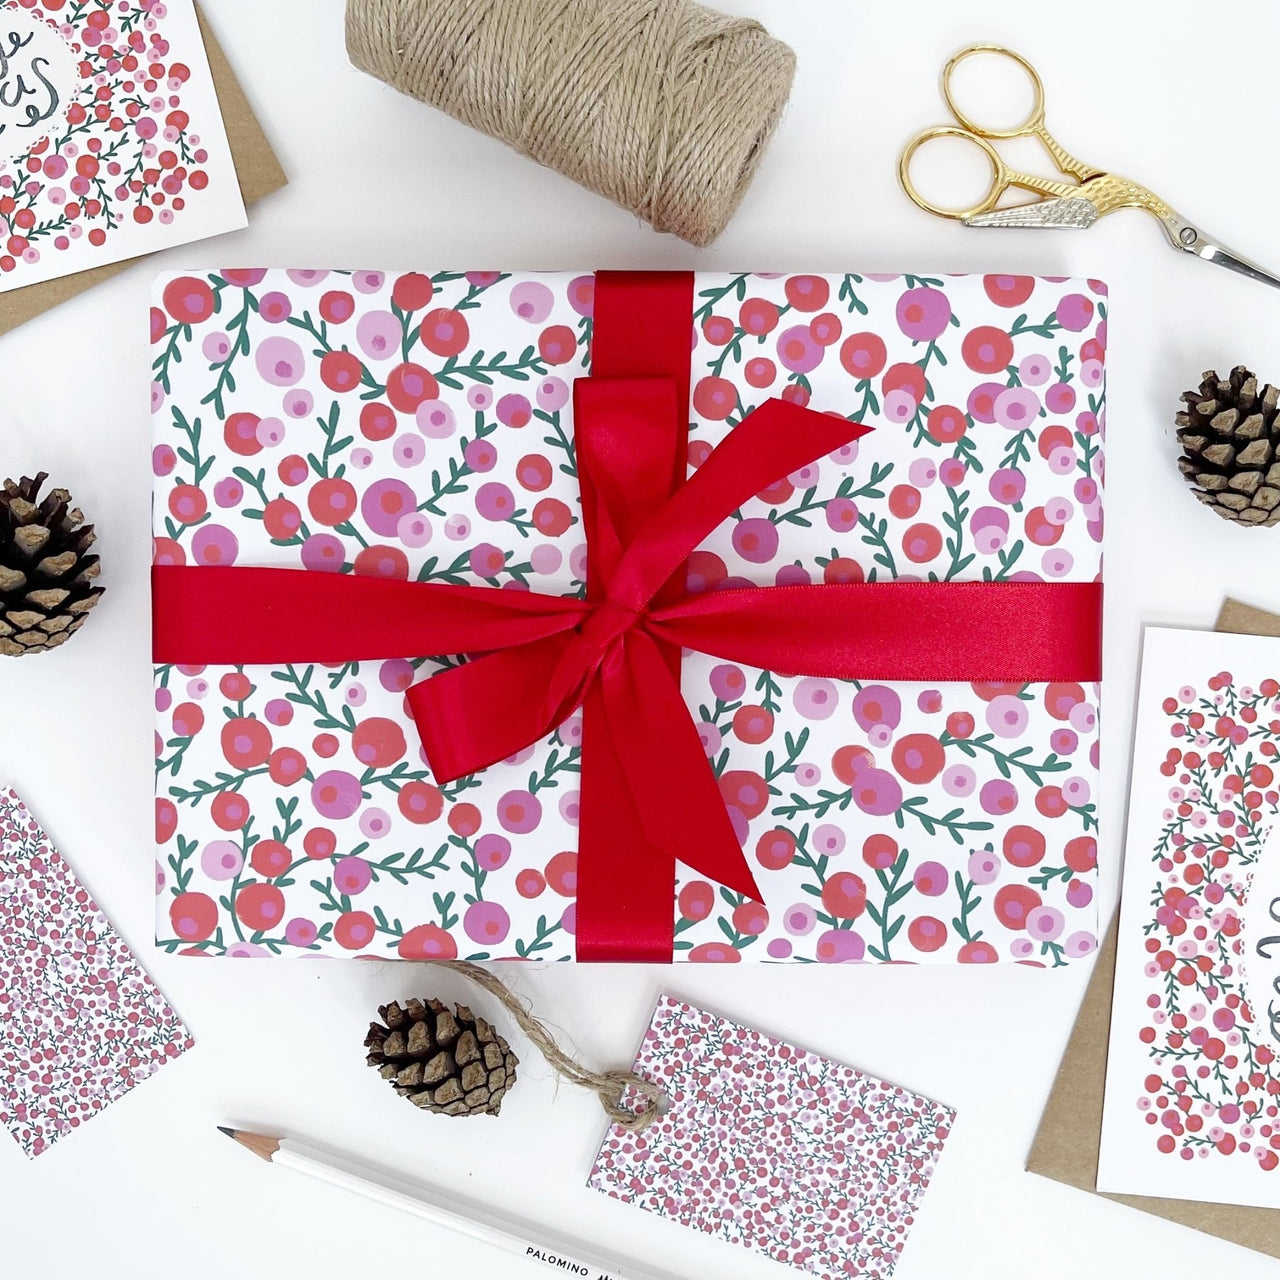 Christmas Red & Pink Berries Recyclable Wrapping Paper Set - WHITE Eco Friendly Gift Wrap and Tags - Made Scotland